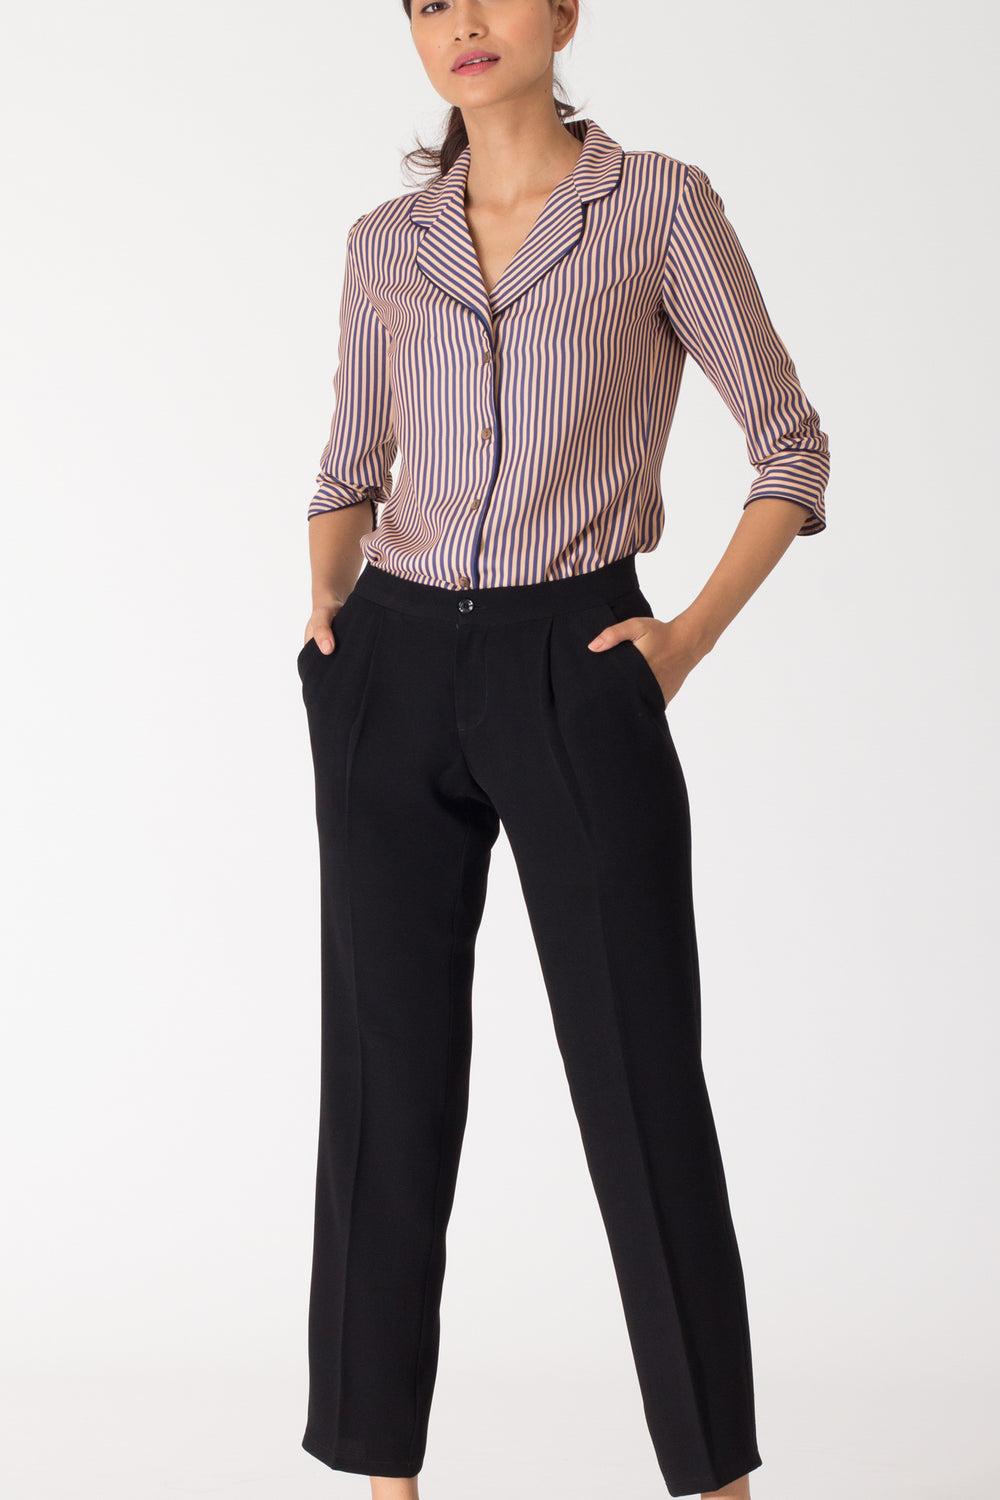 Buy Black Formal Trouser With Adjuster Buttons For Women Online  Best  Prices in India  UNIFORM BUCKET